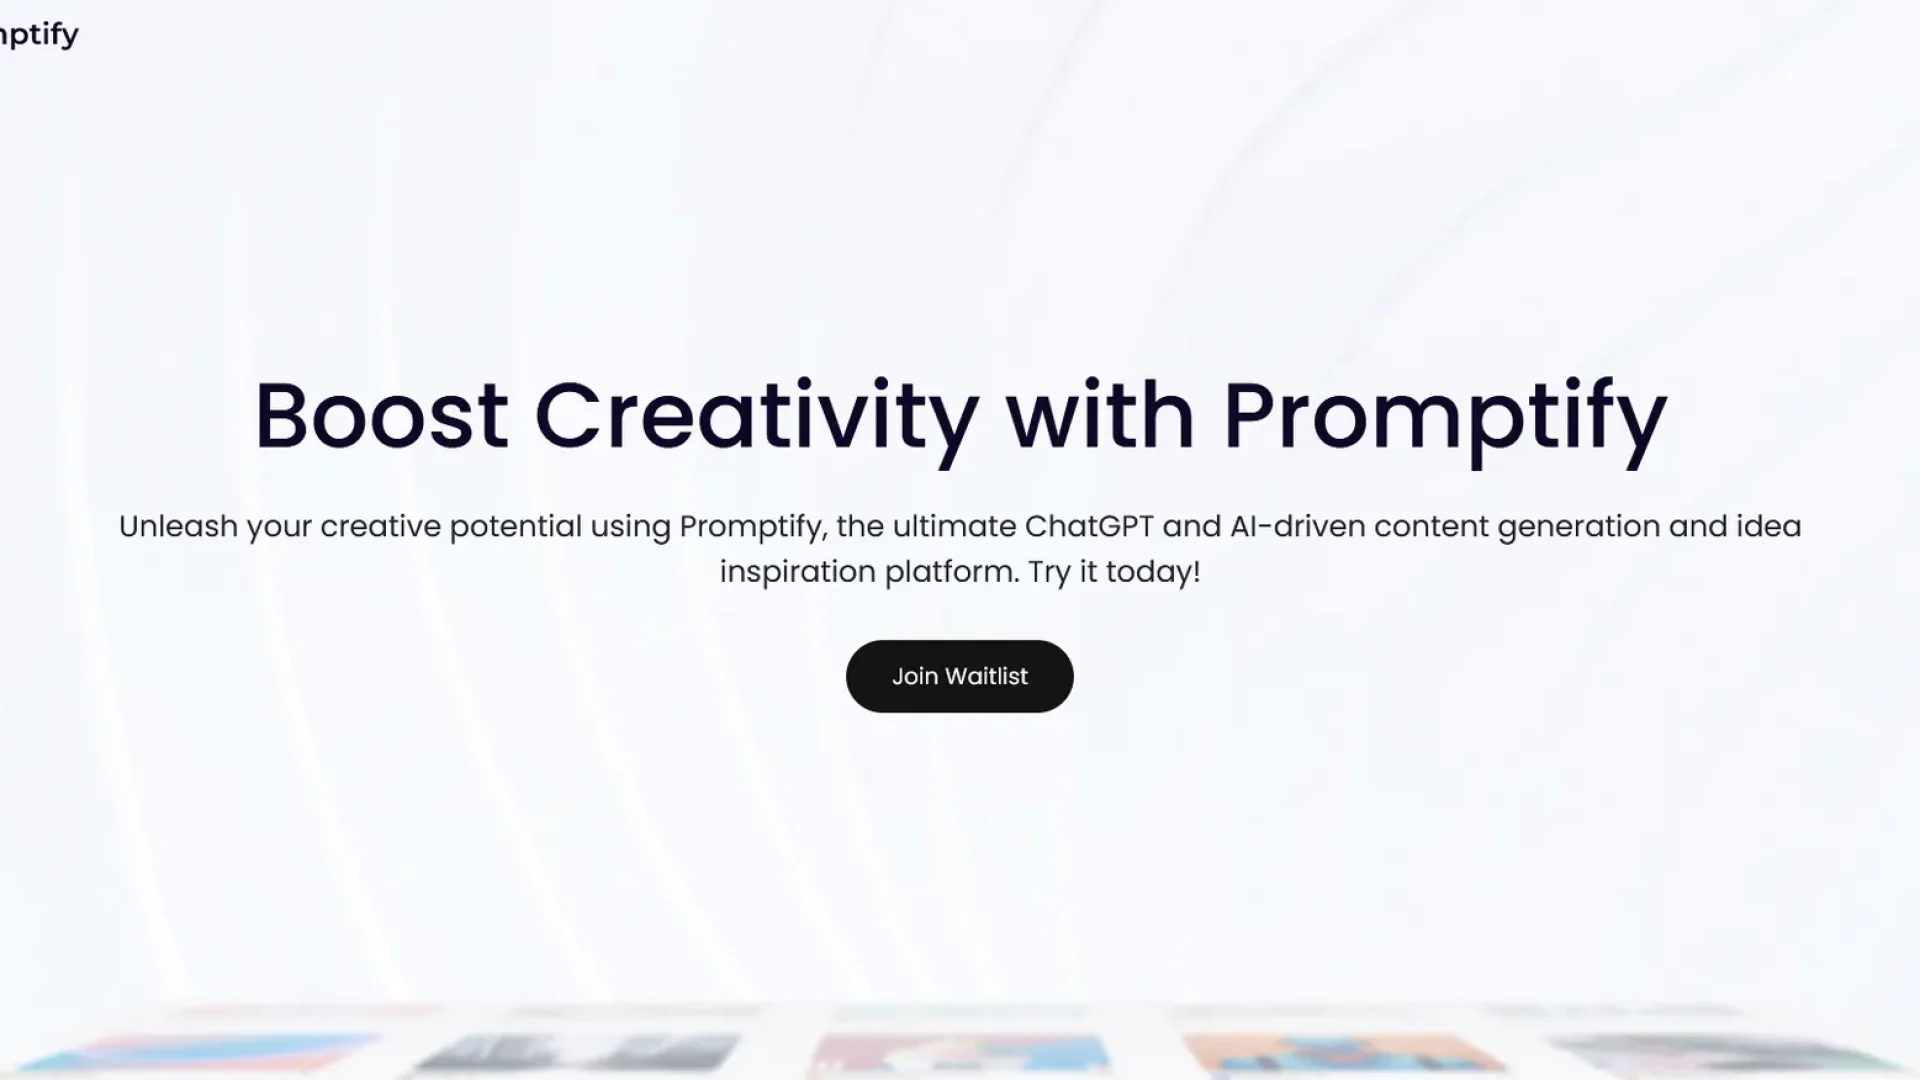 Promptify